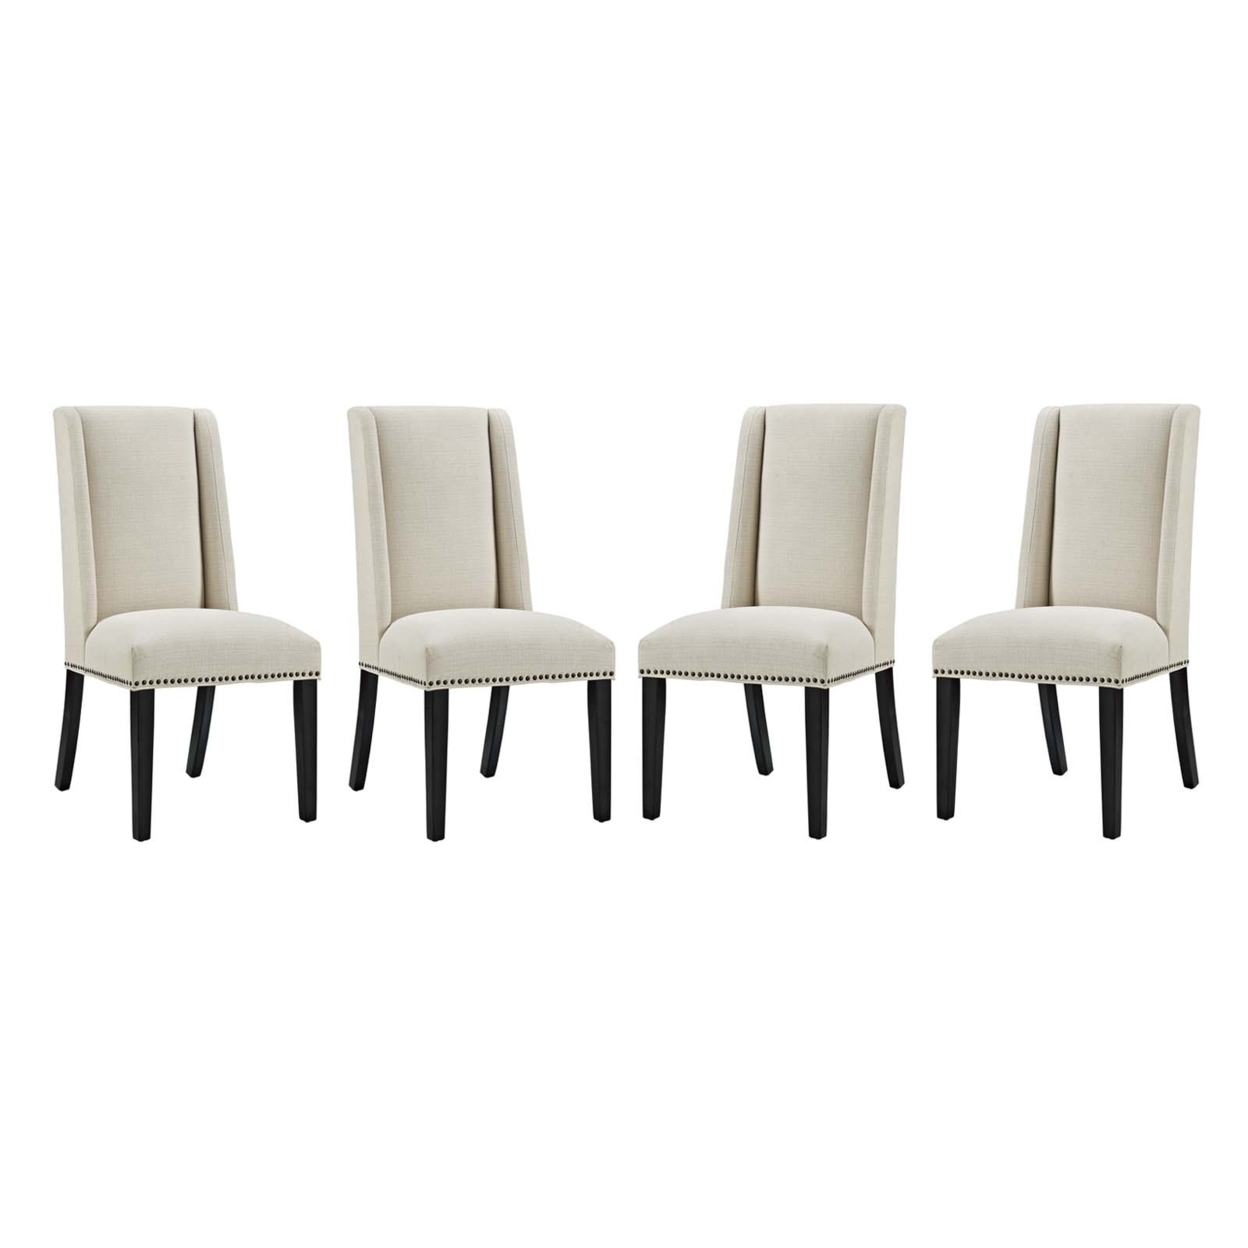 Baron Dining Chair Fabric Set of 4, Beige